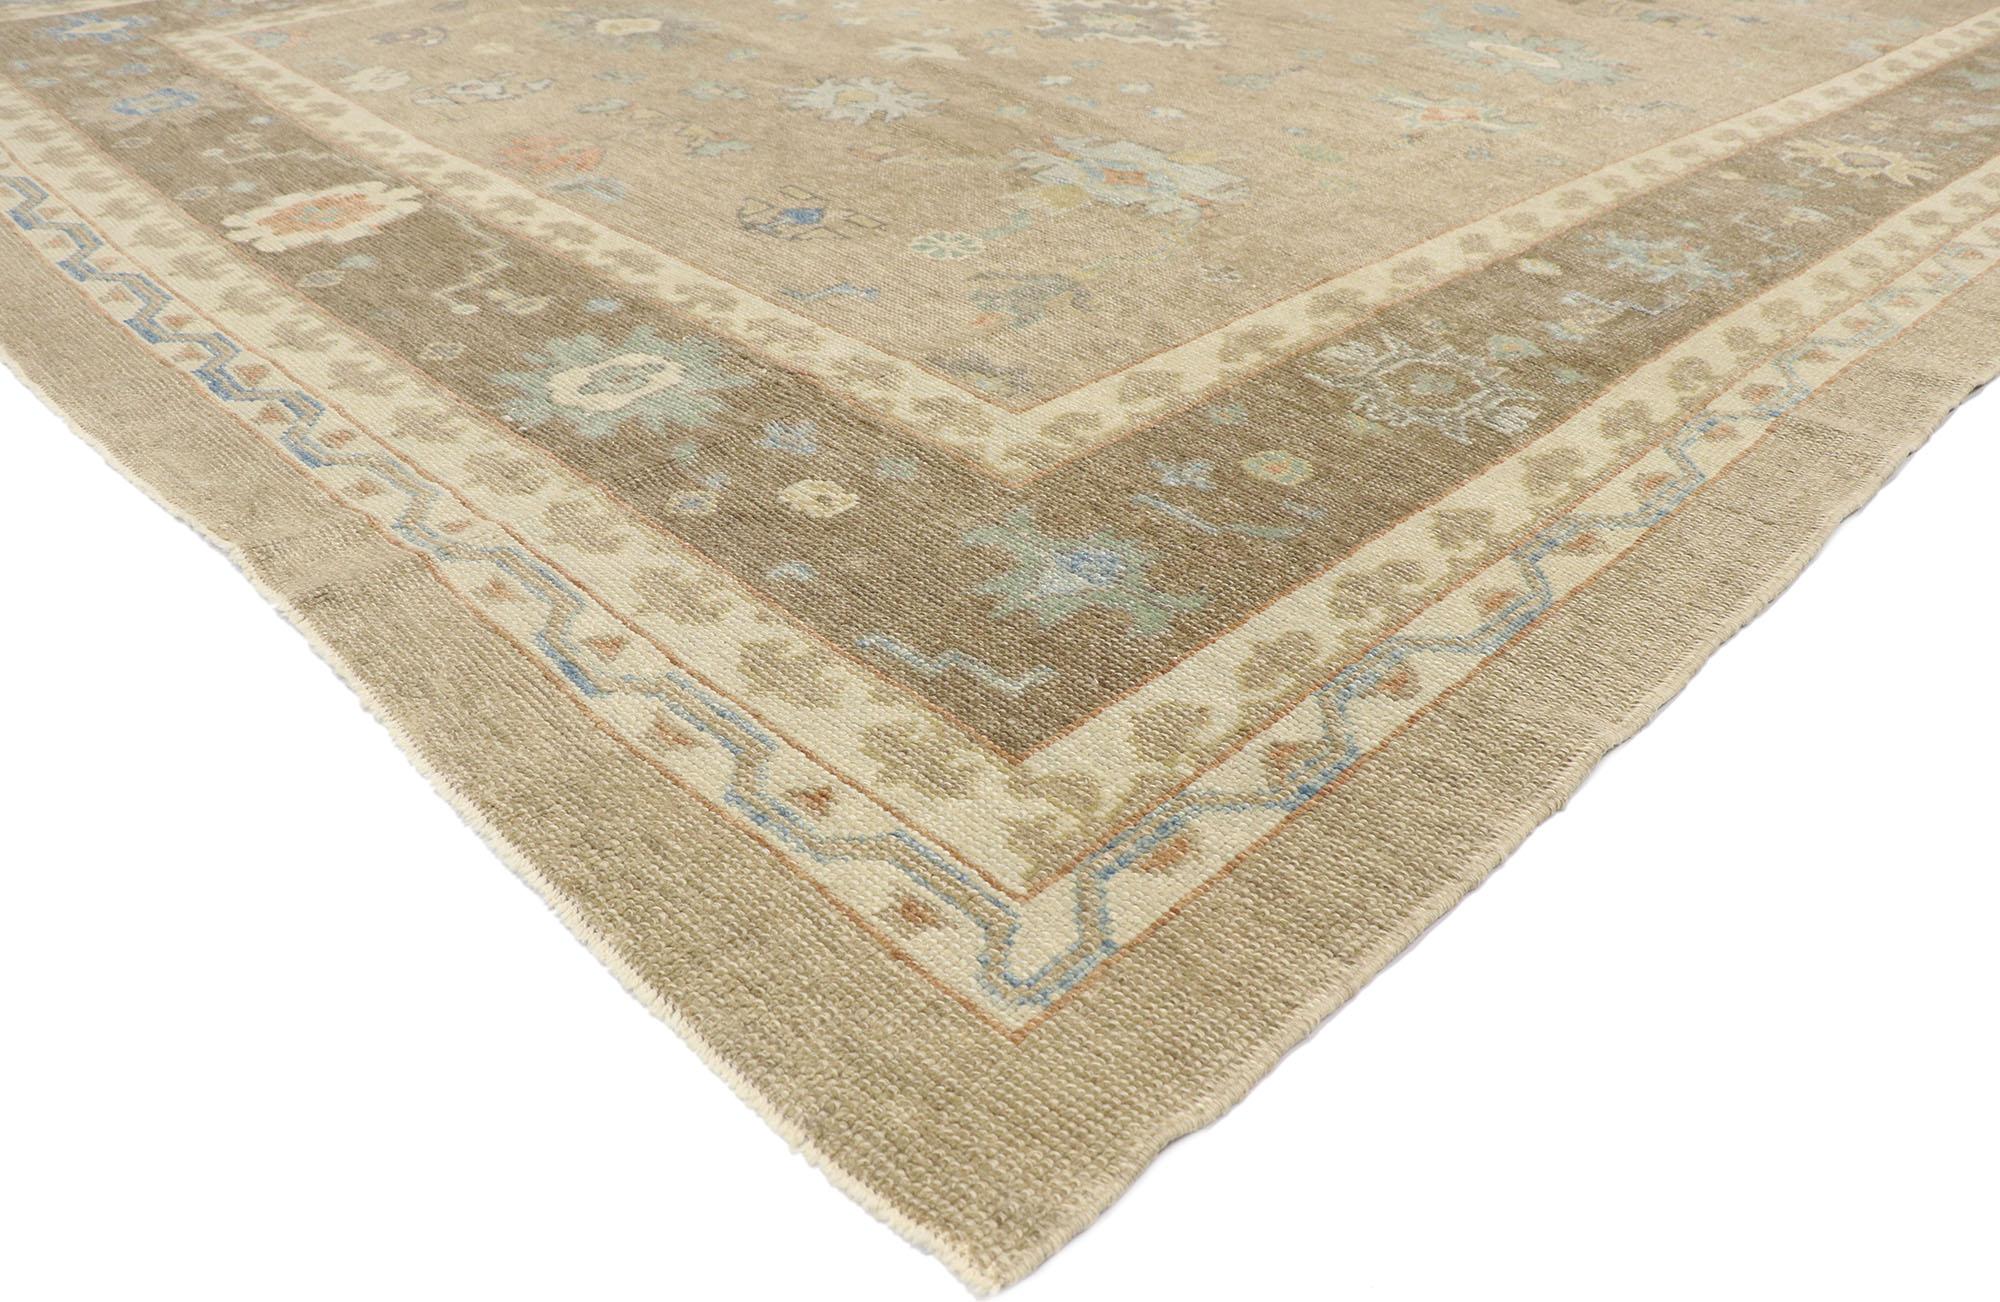 53516, new contemporary Turkish Oushak Rug with Modern Transitional style. This hand-knotted wool contemporary Turkish Oushak rug balances a timeless design with a mix of tranquil sophistication and warm colors. The abrashed brown field features a